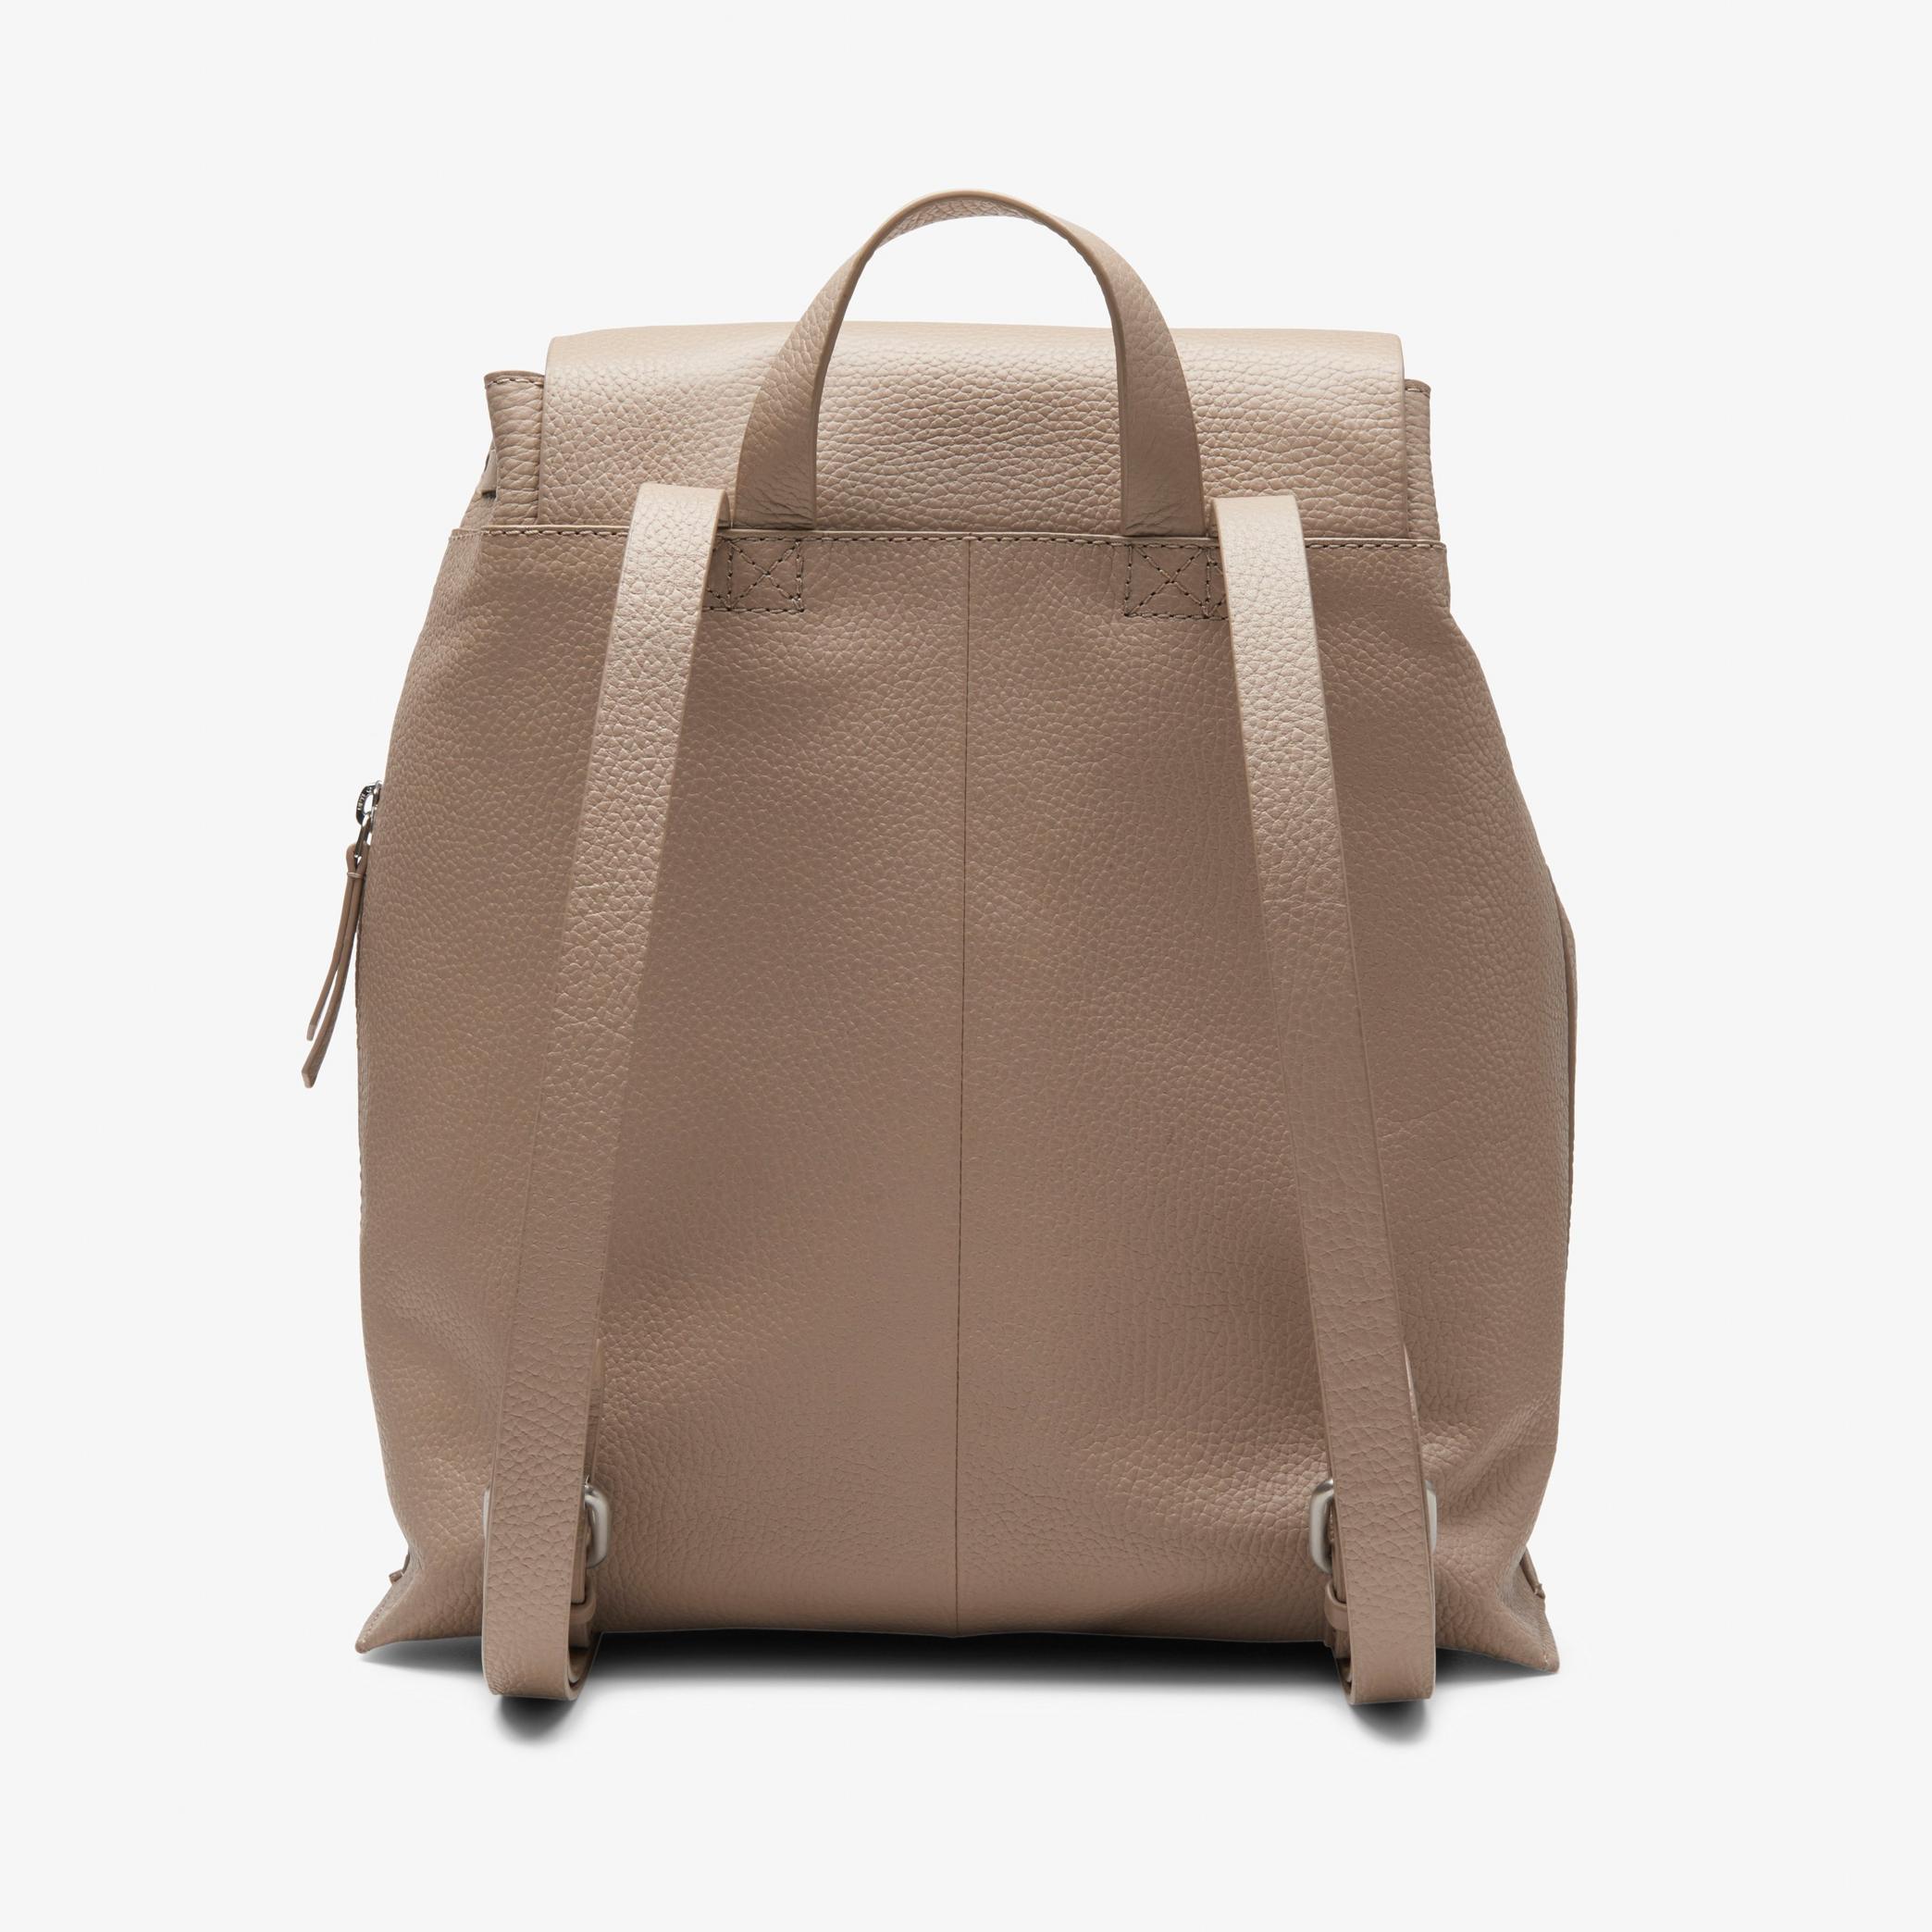 Raelyn Tie Sand Leather Backpack, view 2 of 4